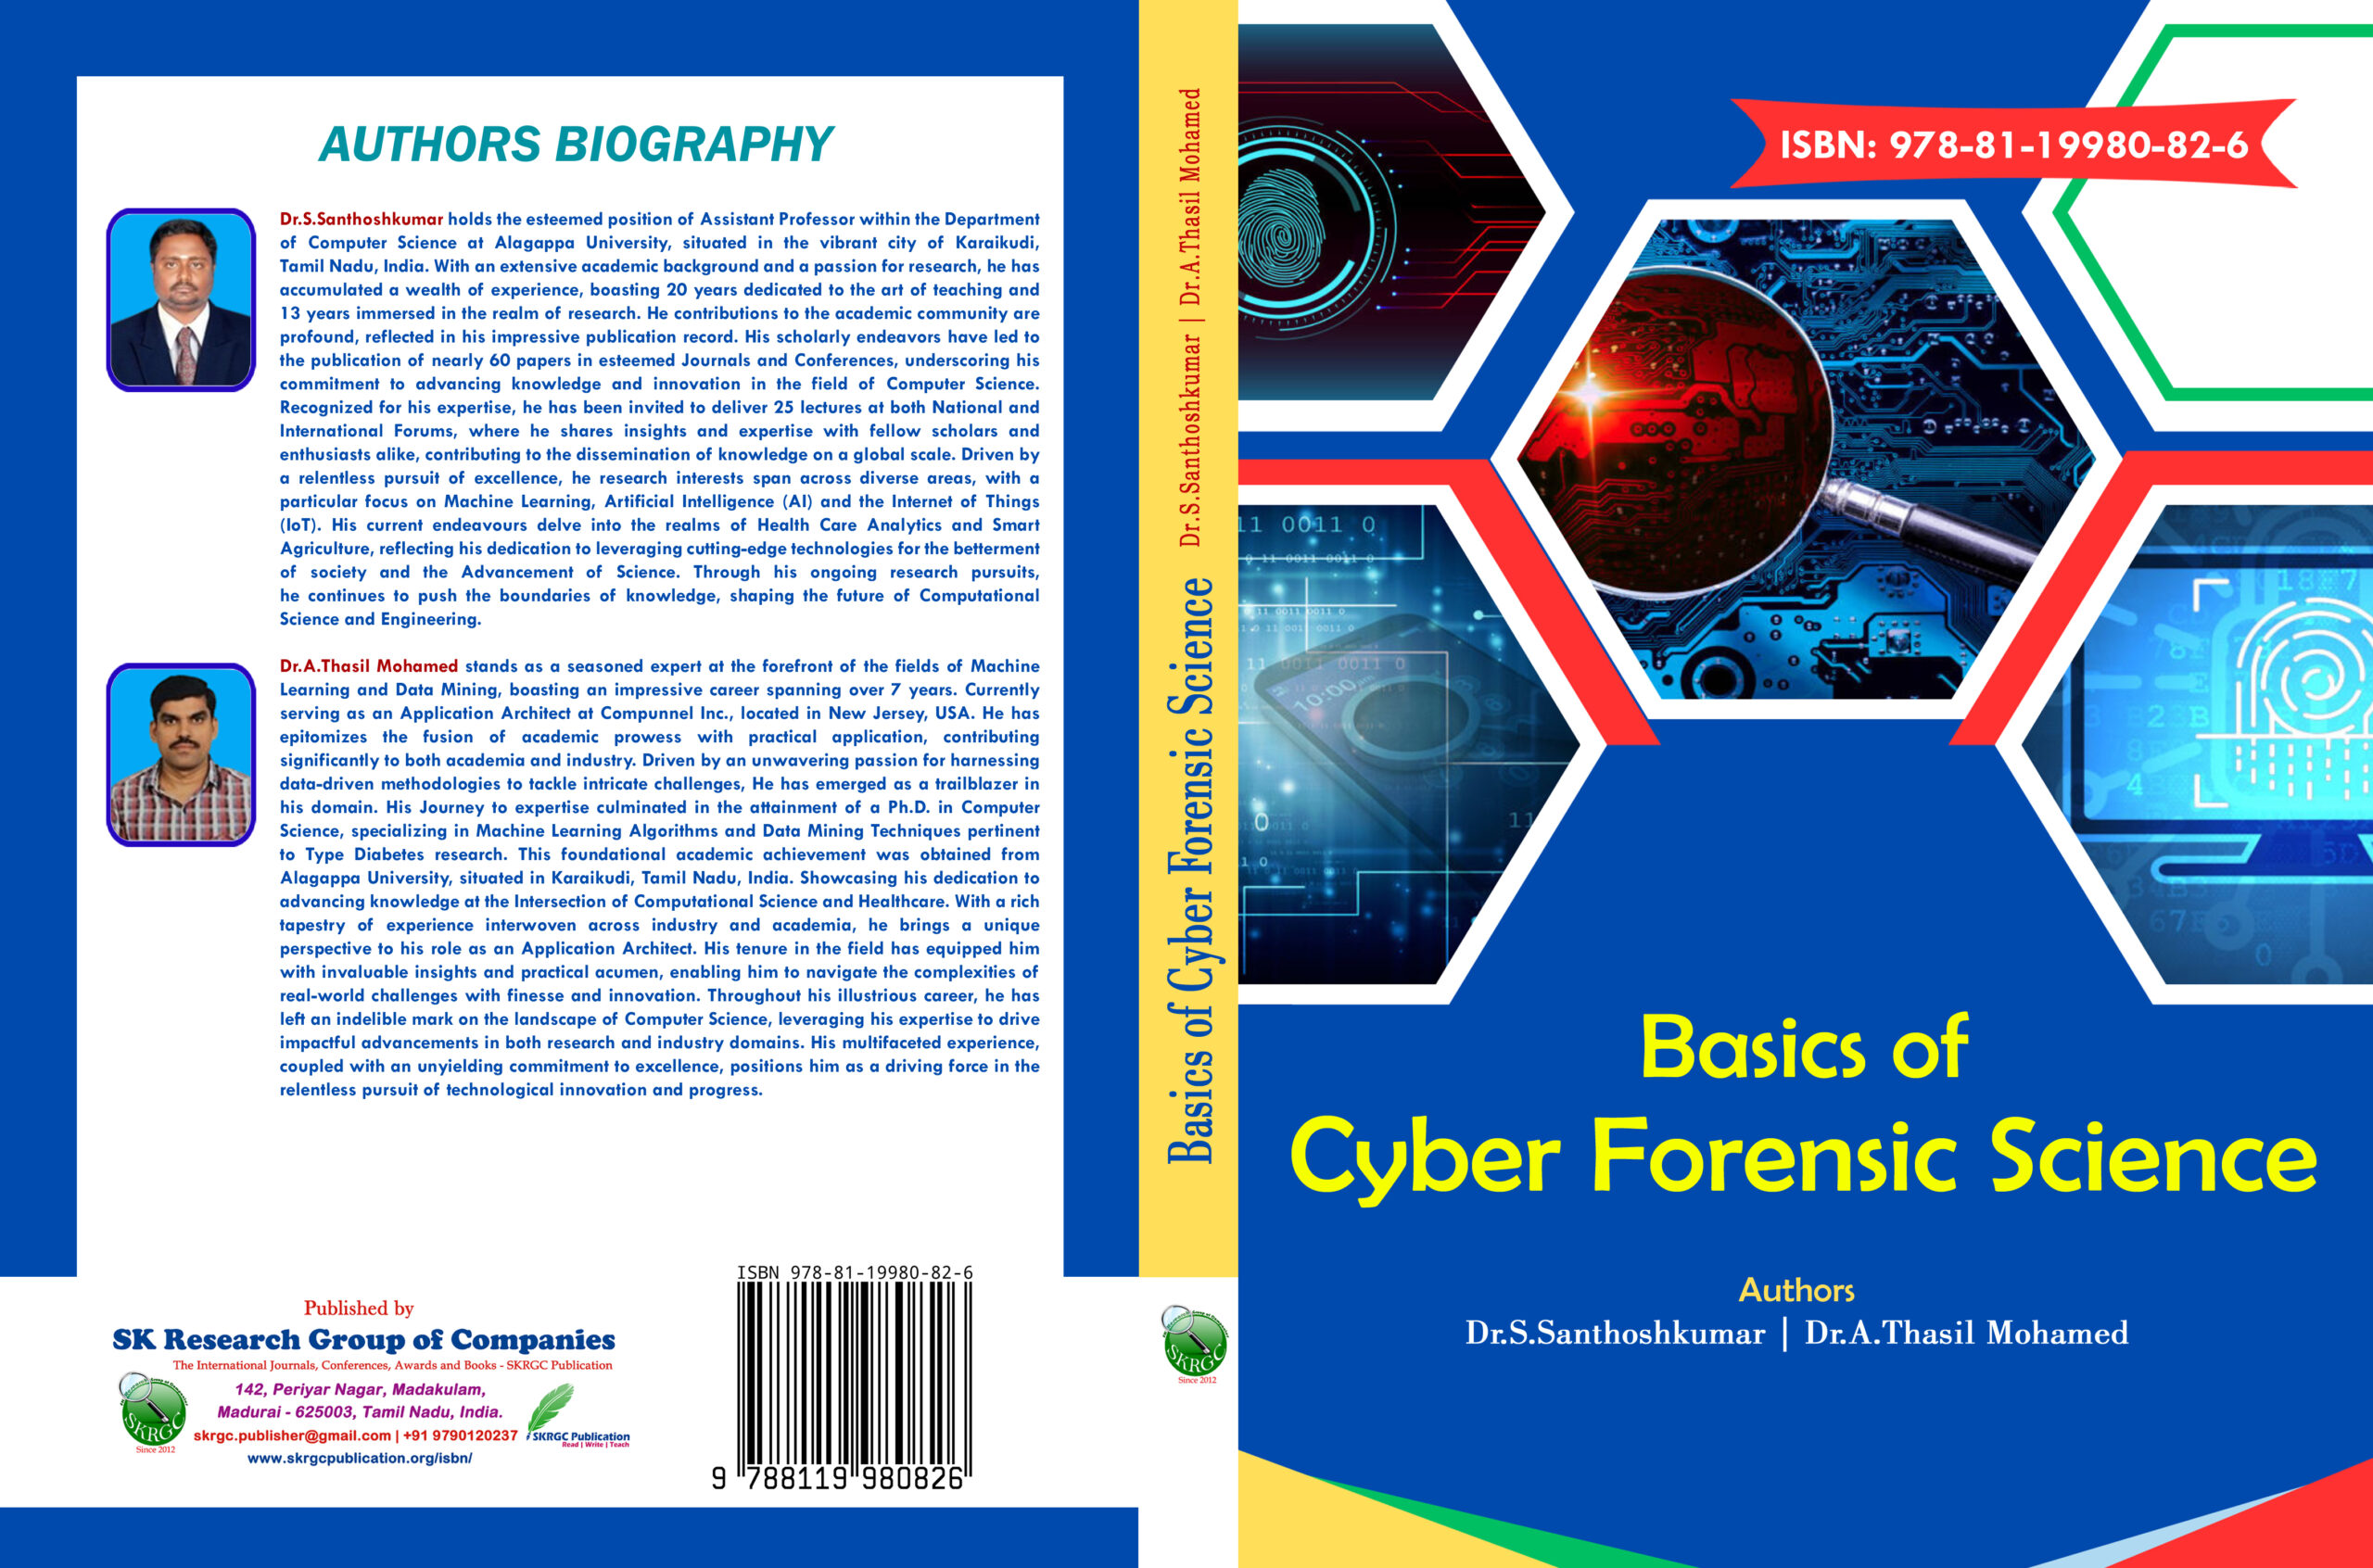 Basics of Cyber Forensic Science